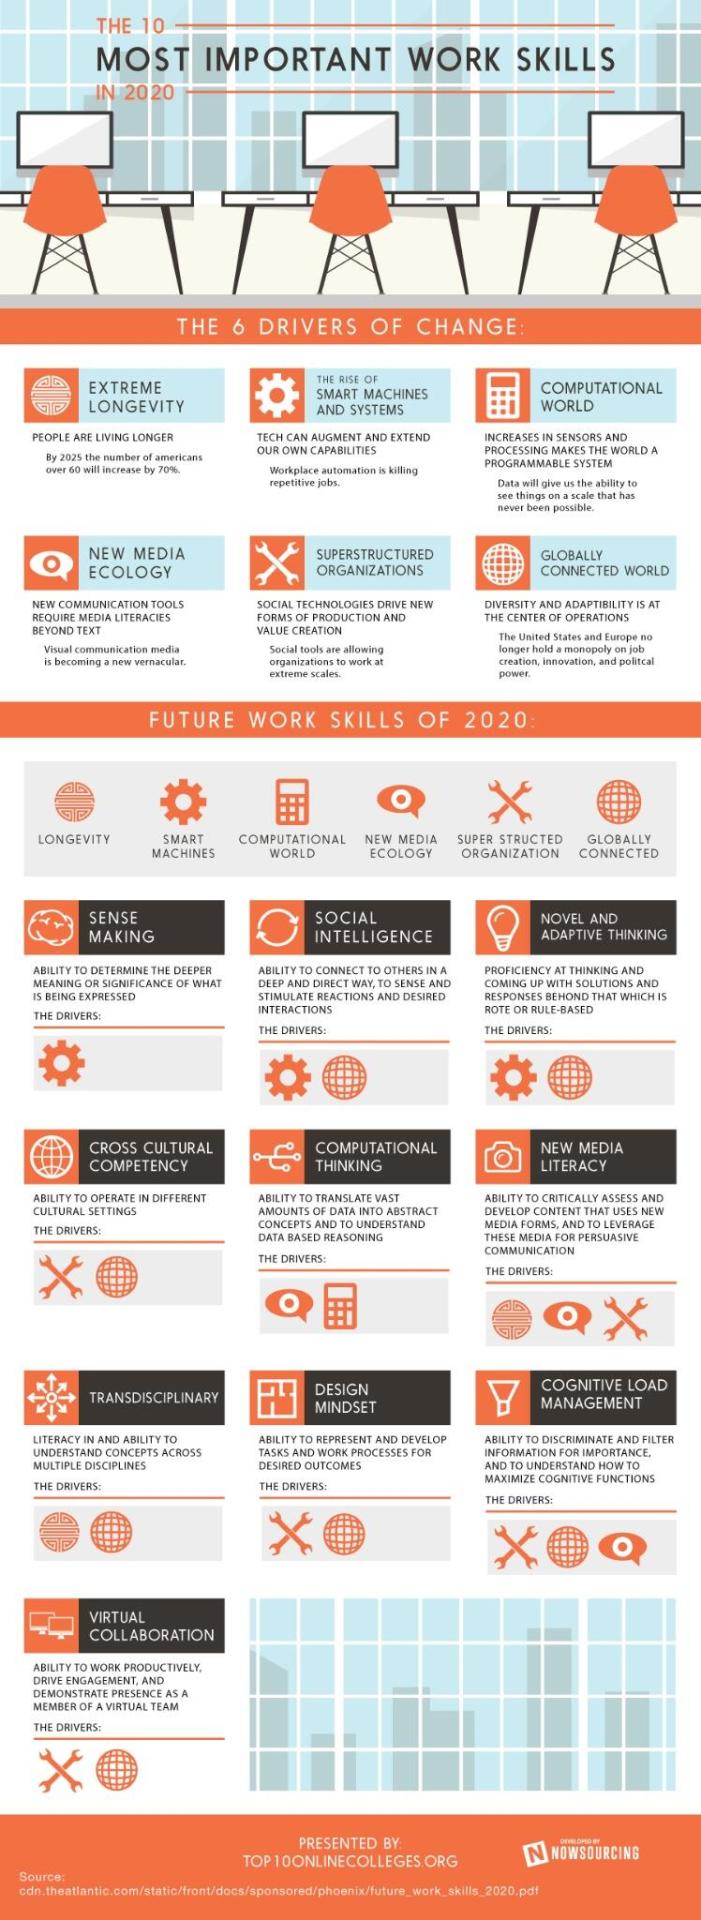 futurescope:
“ The 10 Most Important Business Skills in 2020
Based on this report from the Institute for the Future.
”